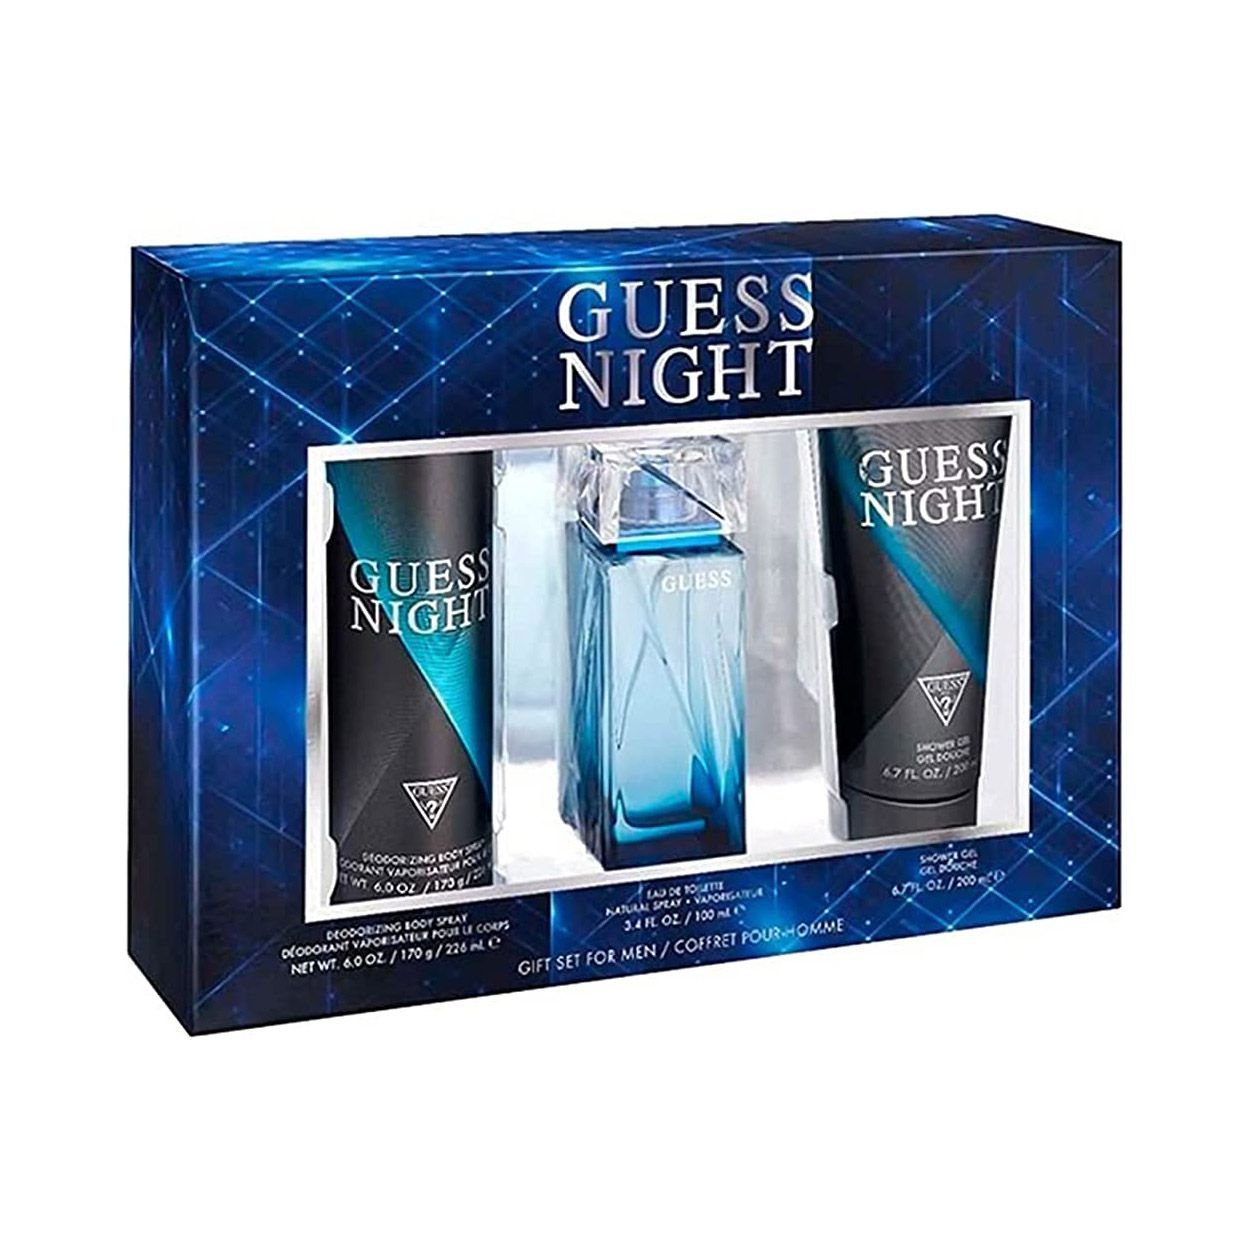 Guess Night 3 Piece Perfume Gift Set for Men at Ratans Online Shop - Perfumes Wholesale and Retailer Fragrance